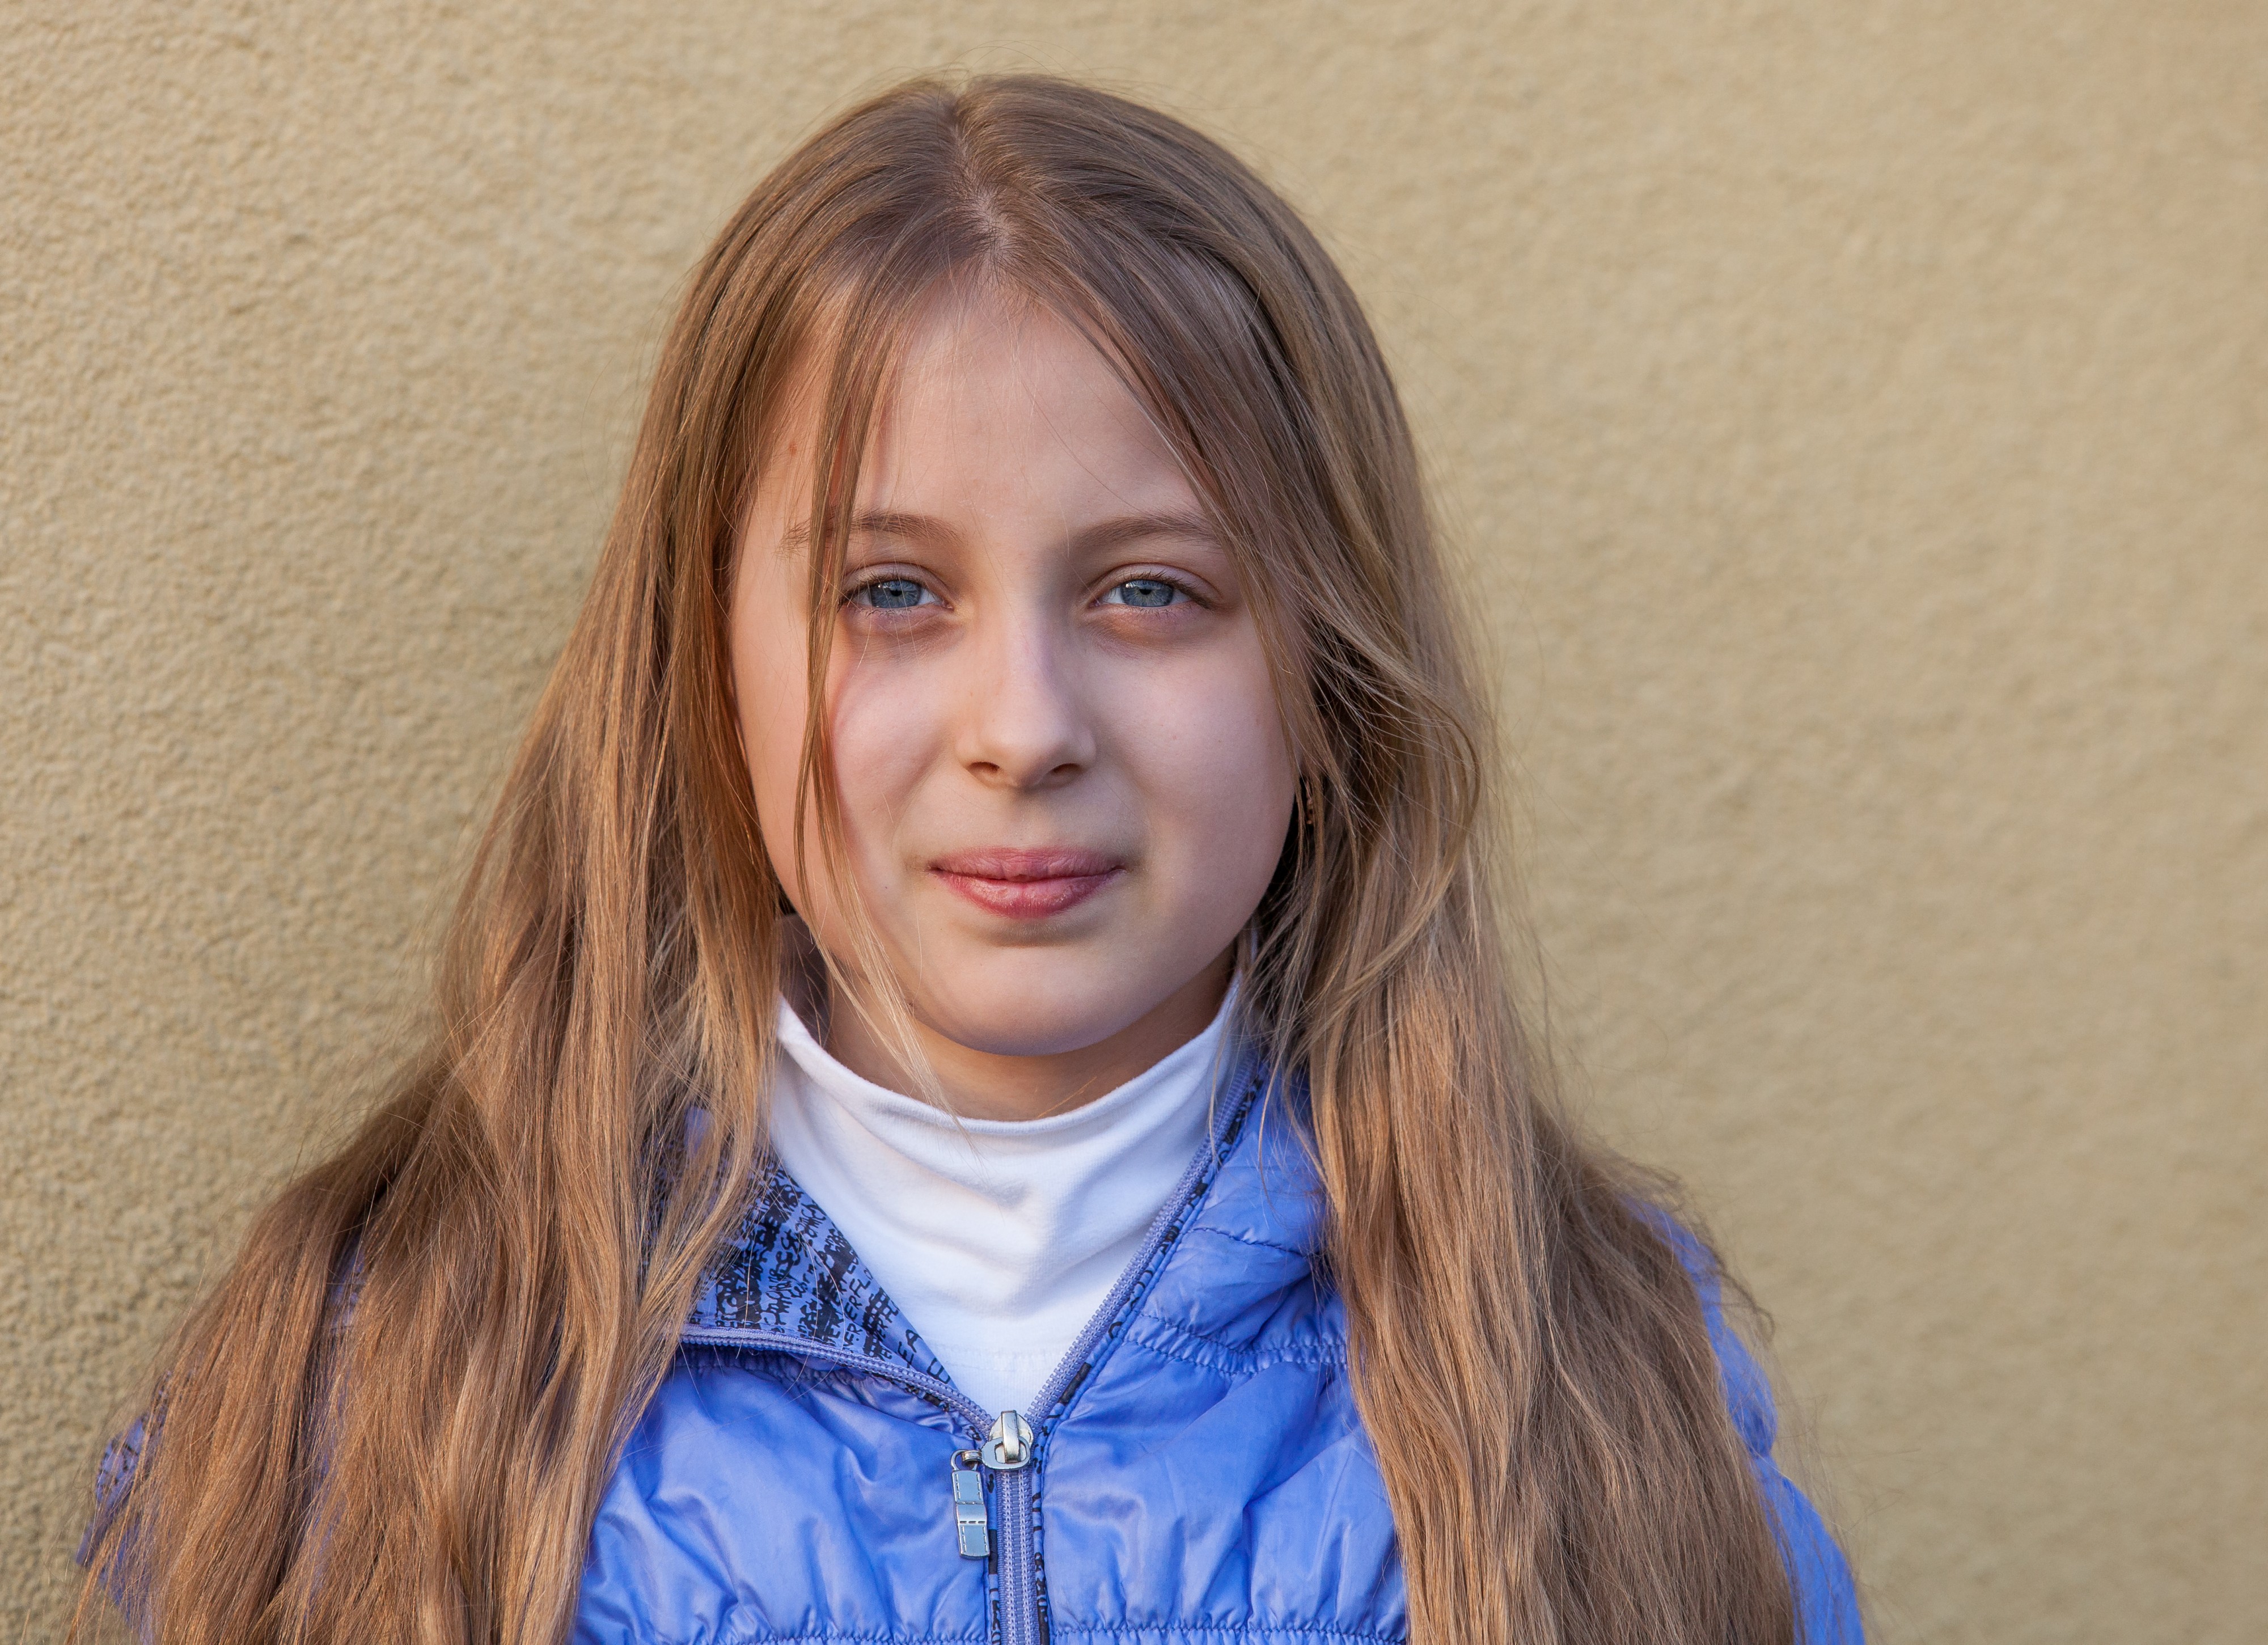 a blond long-haired Roman-Catholic girl photographed in April 2014, portrait 3 out of 11